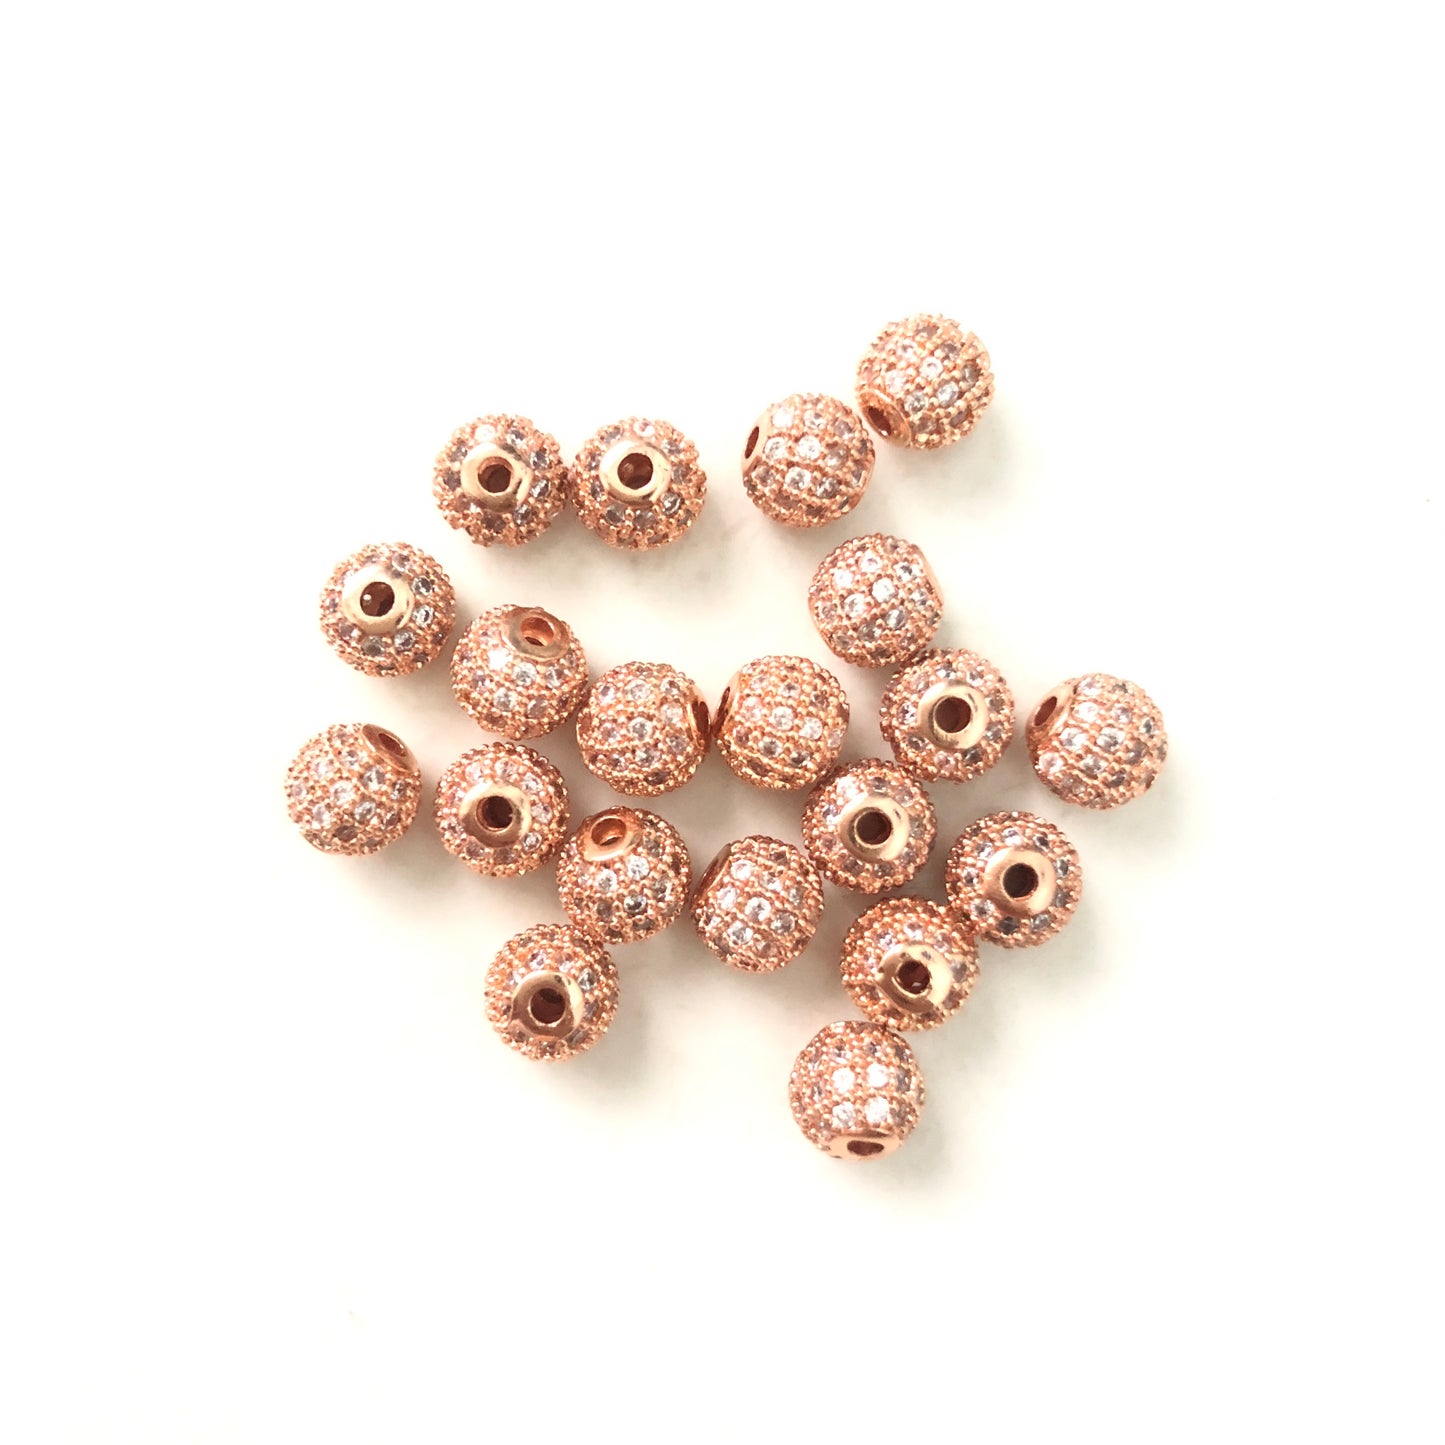 20pcs/lot 6mm Clear CZ Paved Ball Spacers Rose Gold CZ Paved Spacers 6mm Beads Ball Beads Charms Beads Beyond